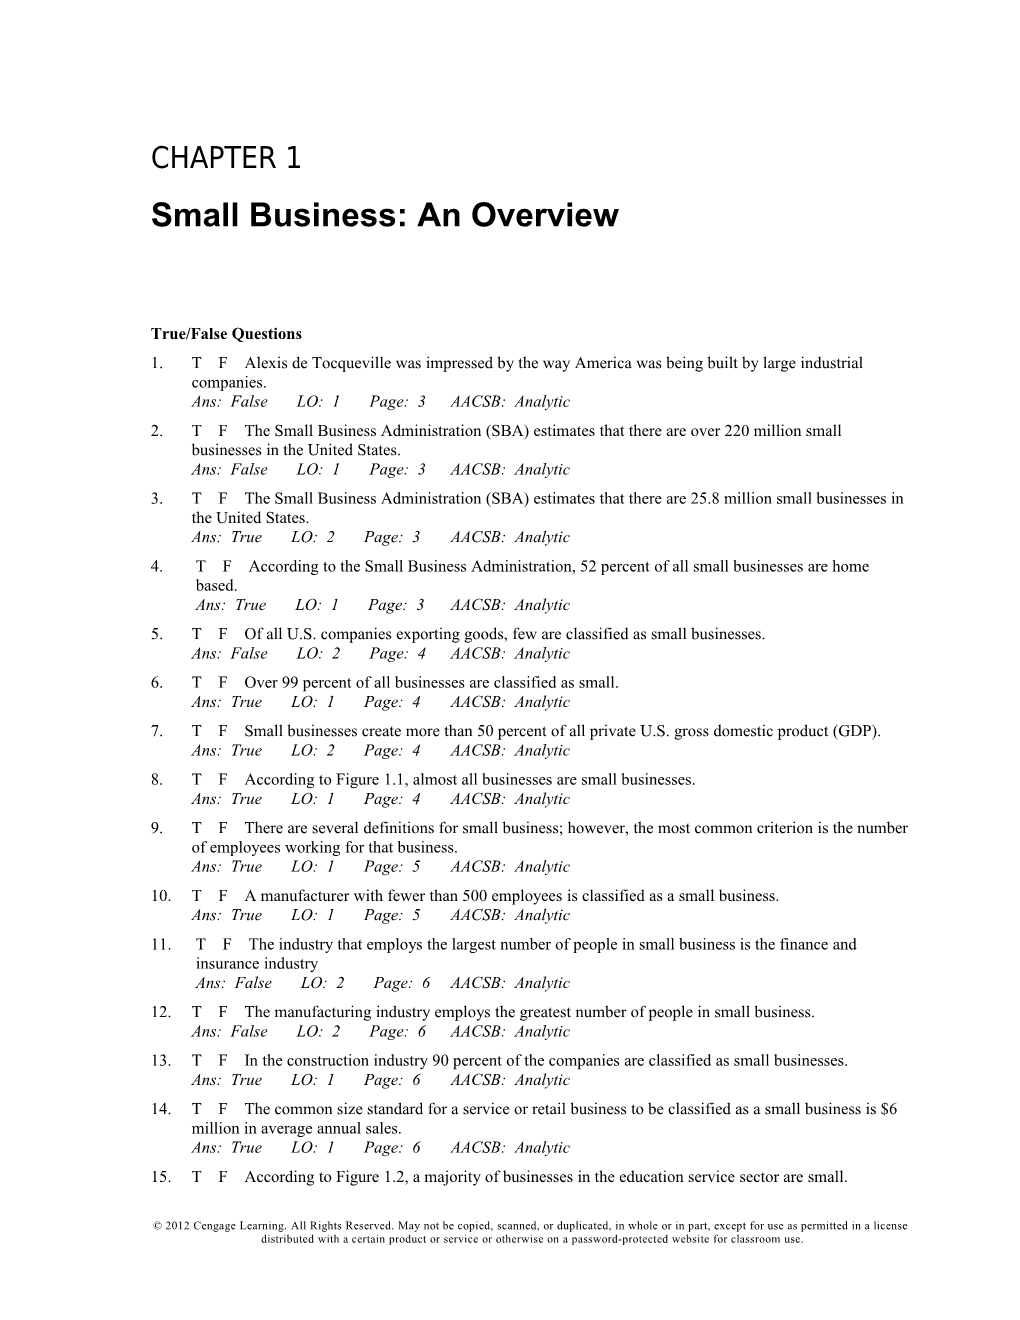 Chapter 1: Small Business: an Overview 1